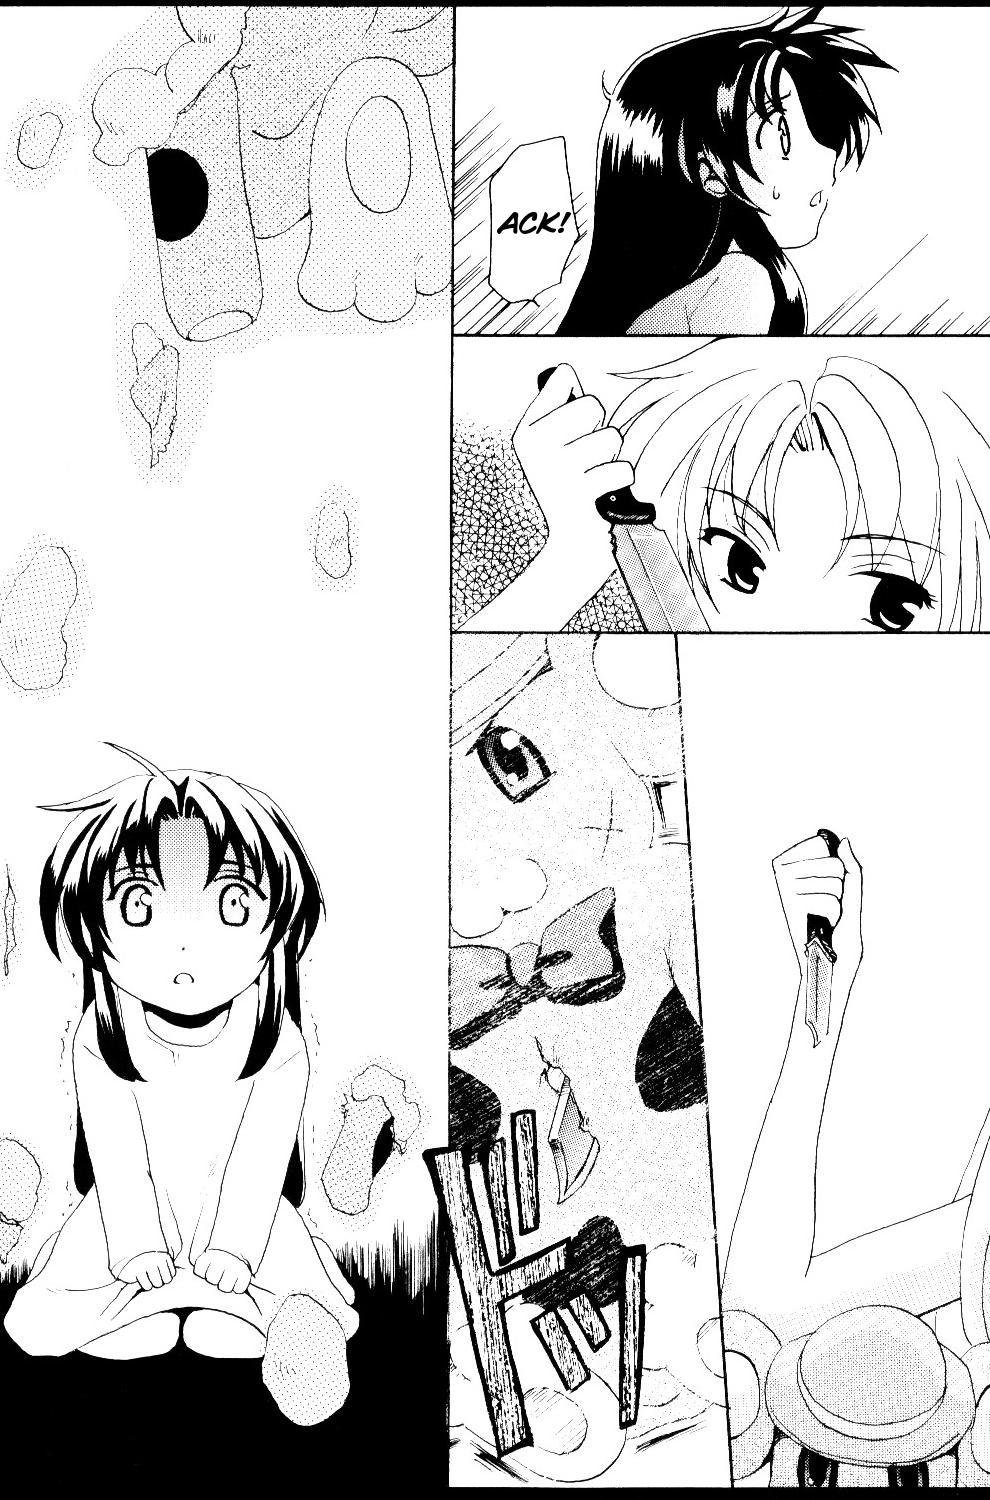 Massive Misomeru Futari | The Two Who Fall in Love at First Sight - Full metal panic Beauty - Page 9